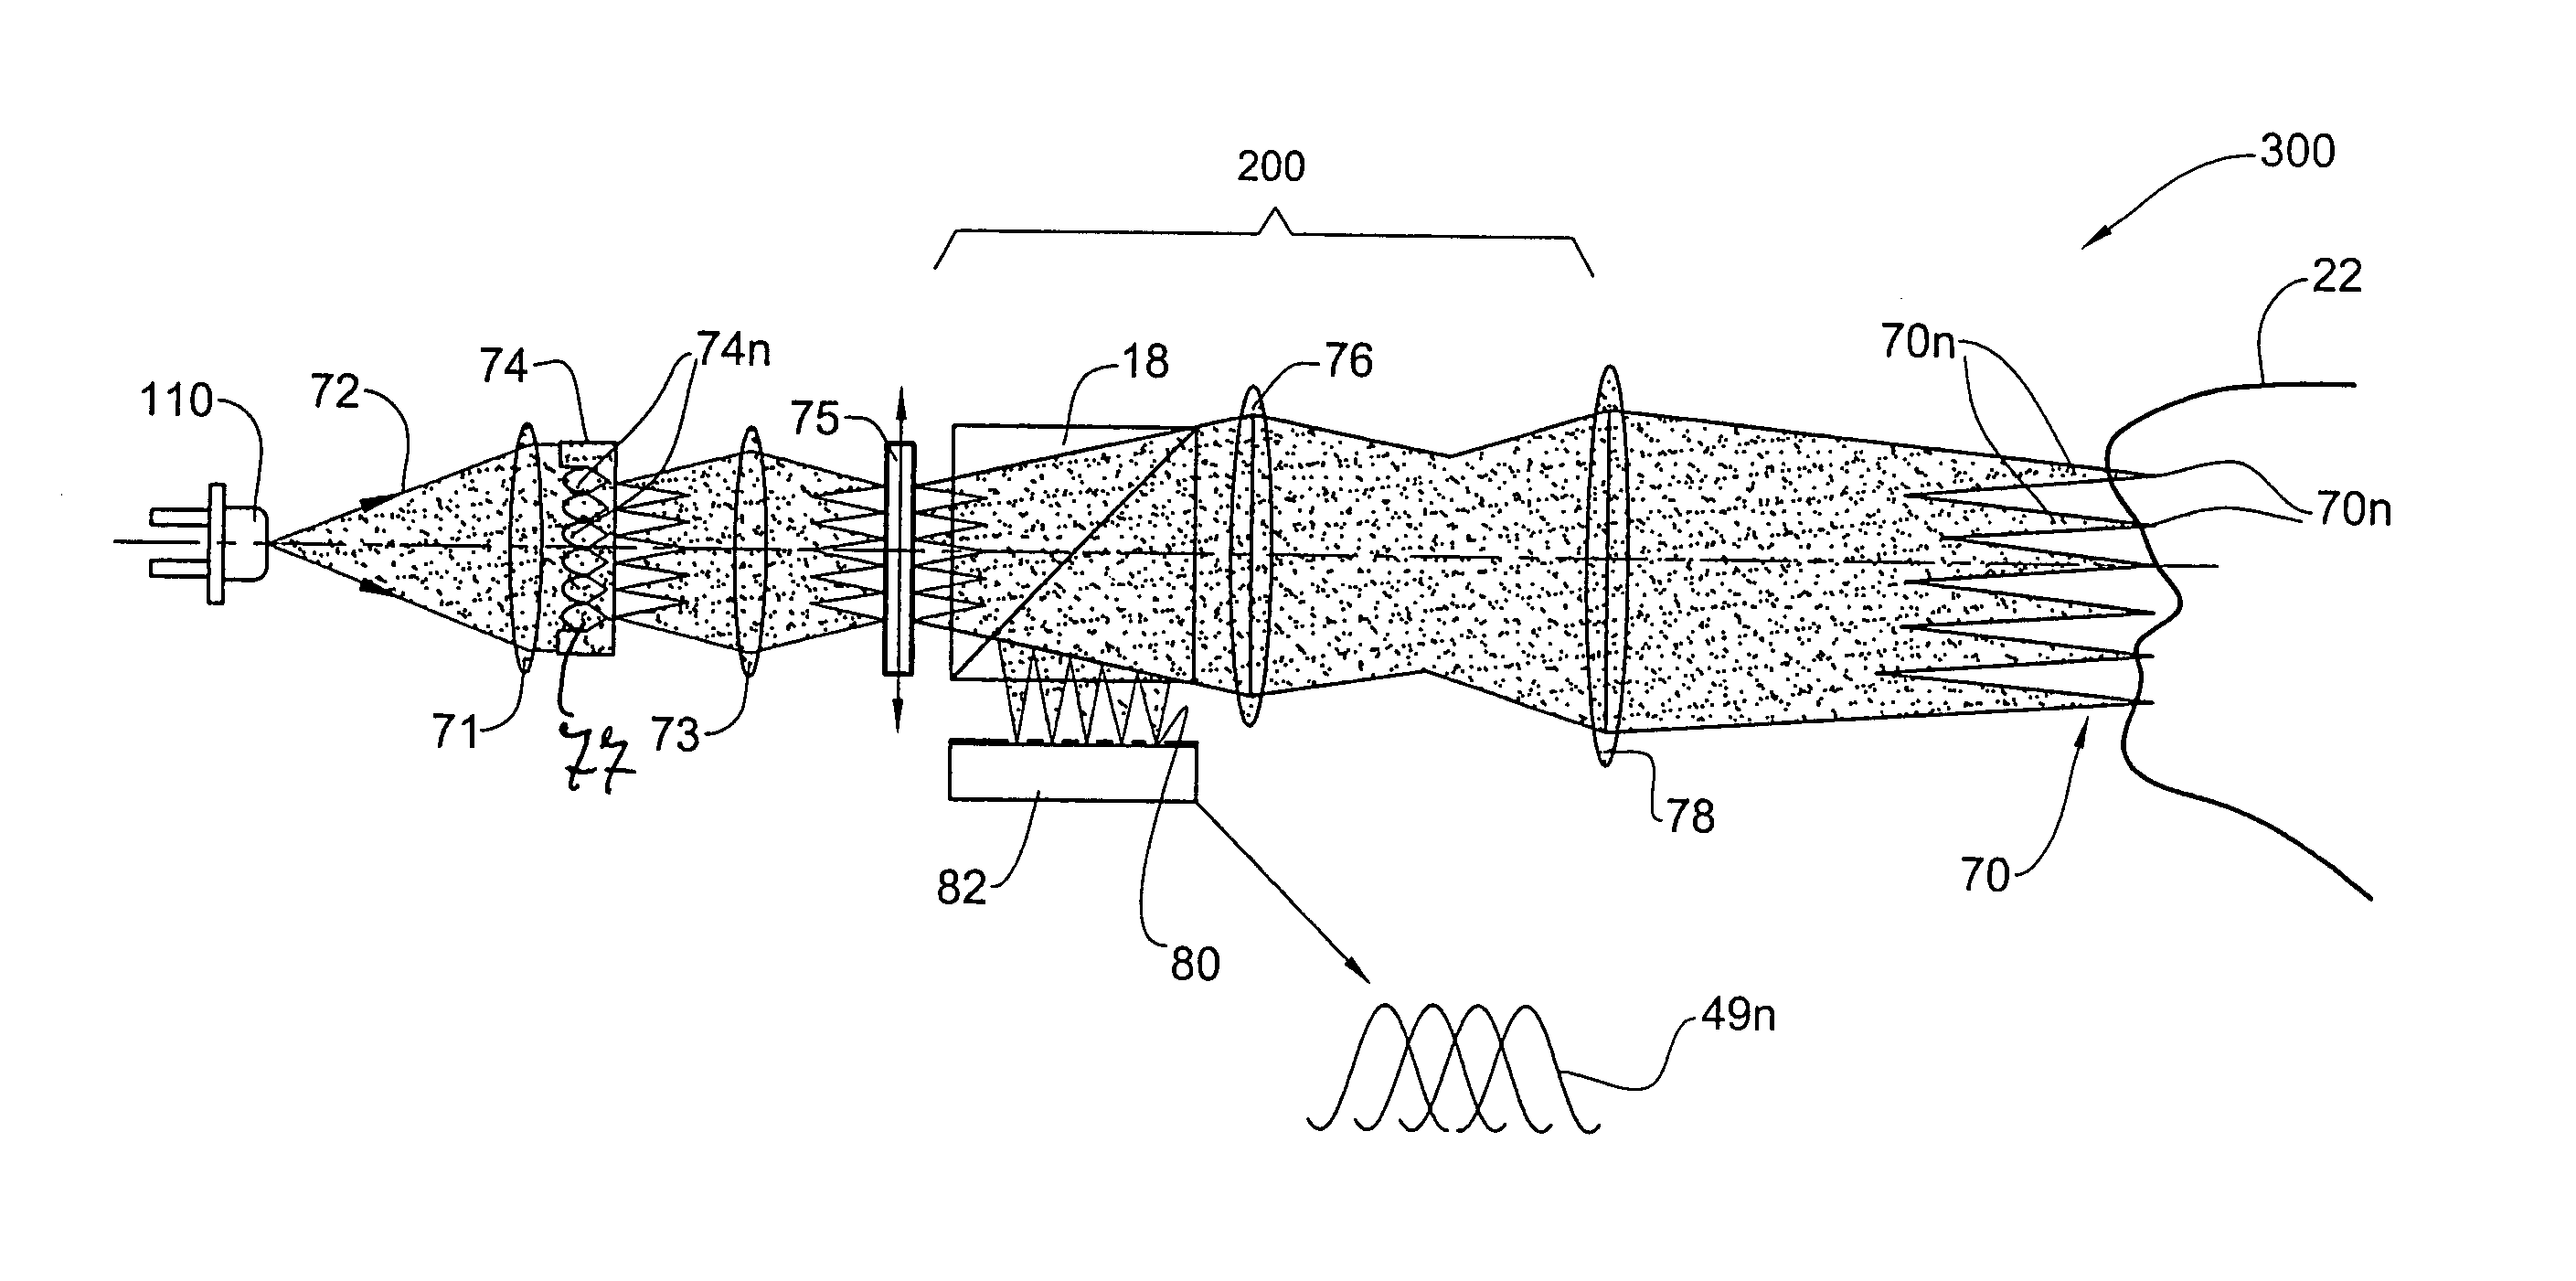 Apparatus and method for providing high intensity non-coherent light and for speckle reduction